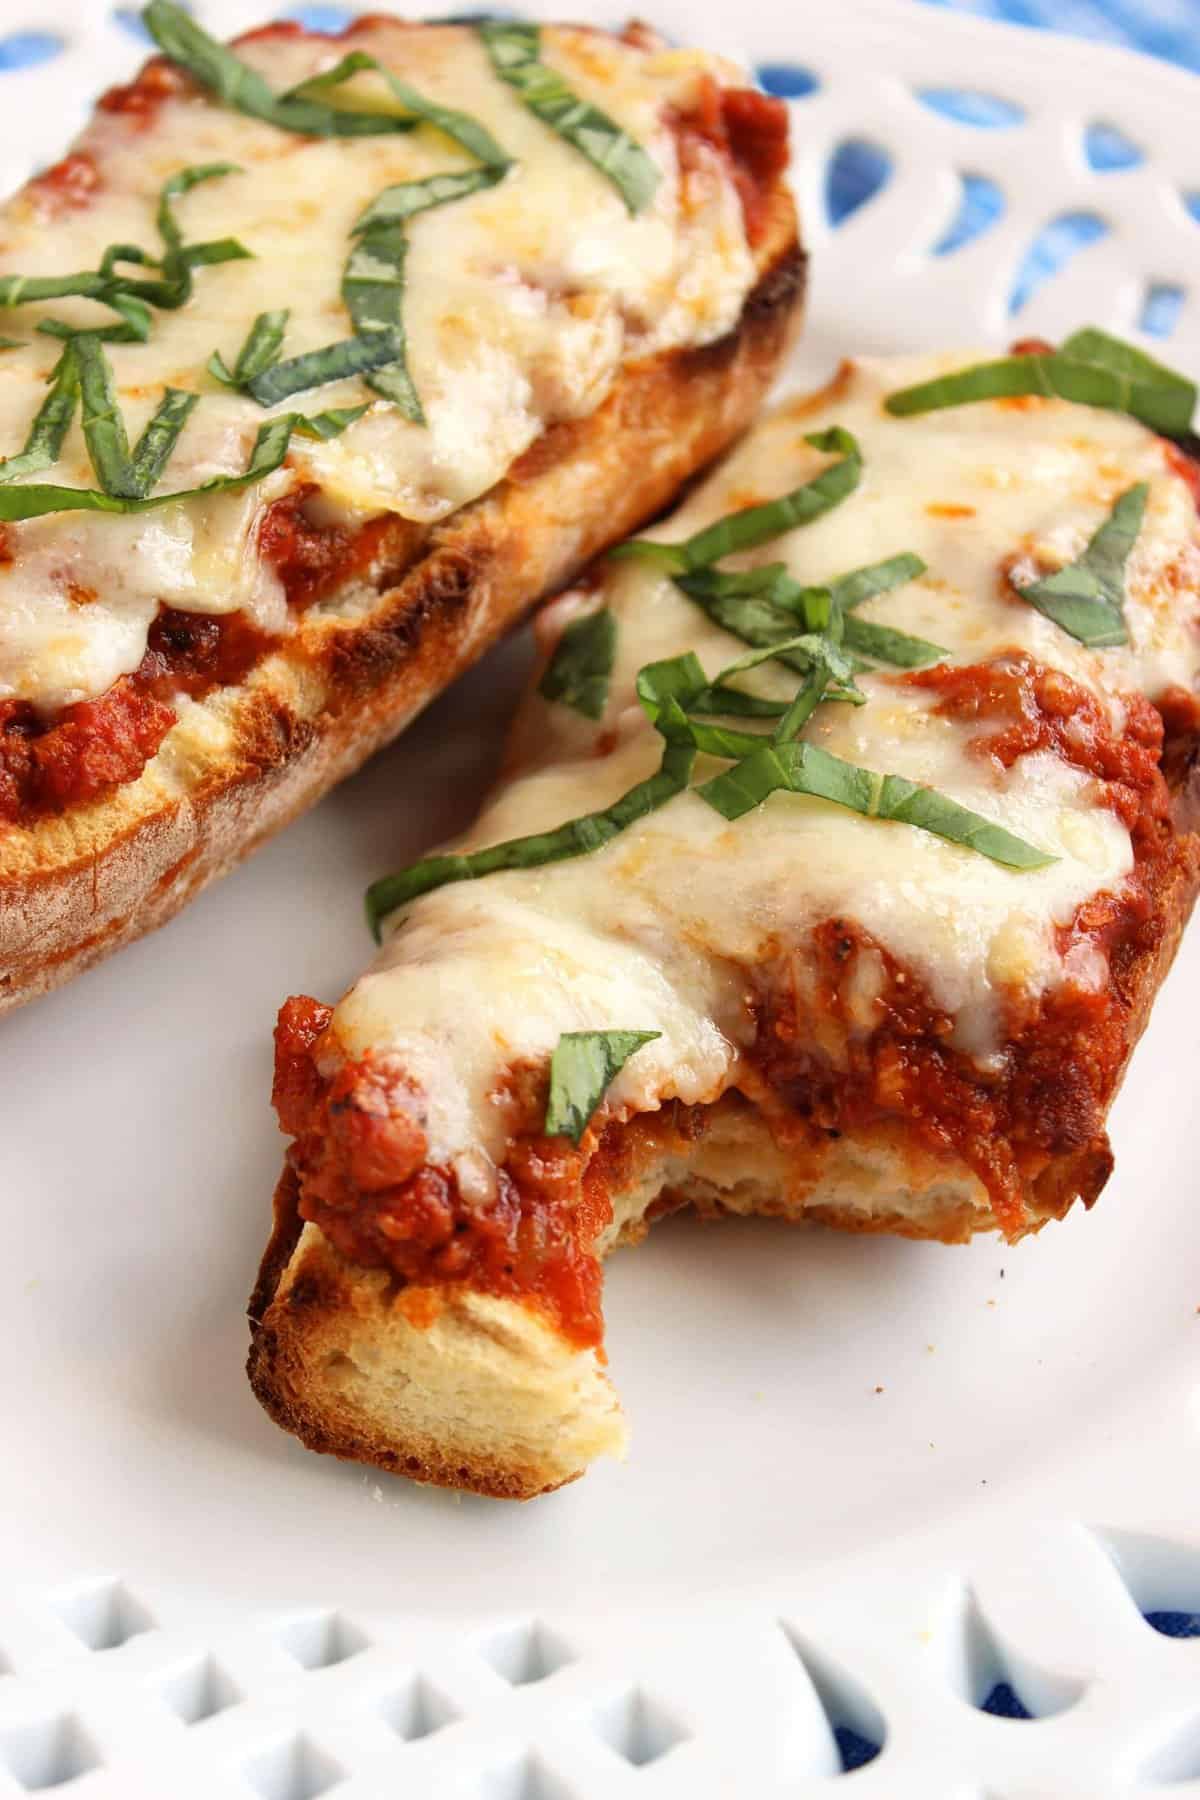 Easy Bolognese French Bread Pizza - The Suburban Soapbox